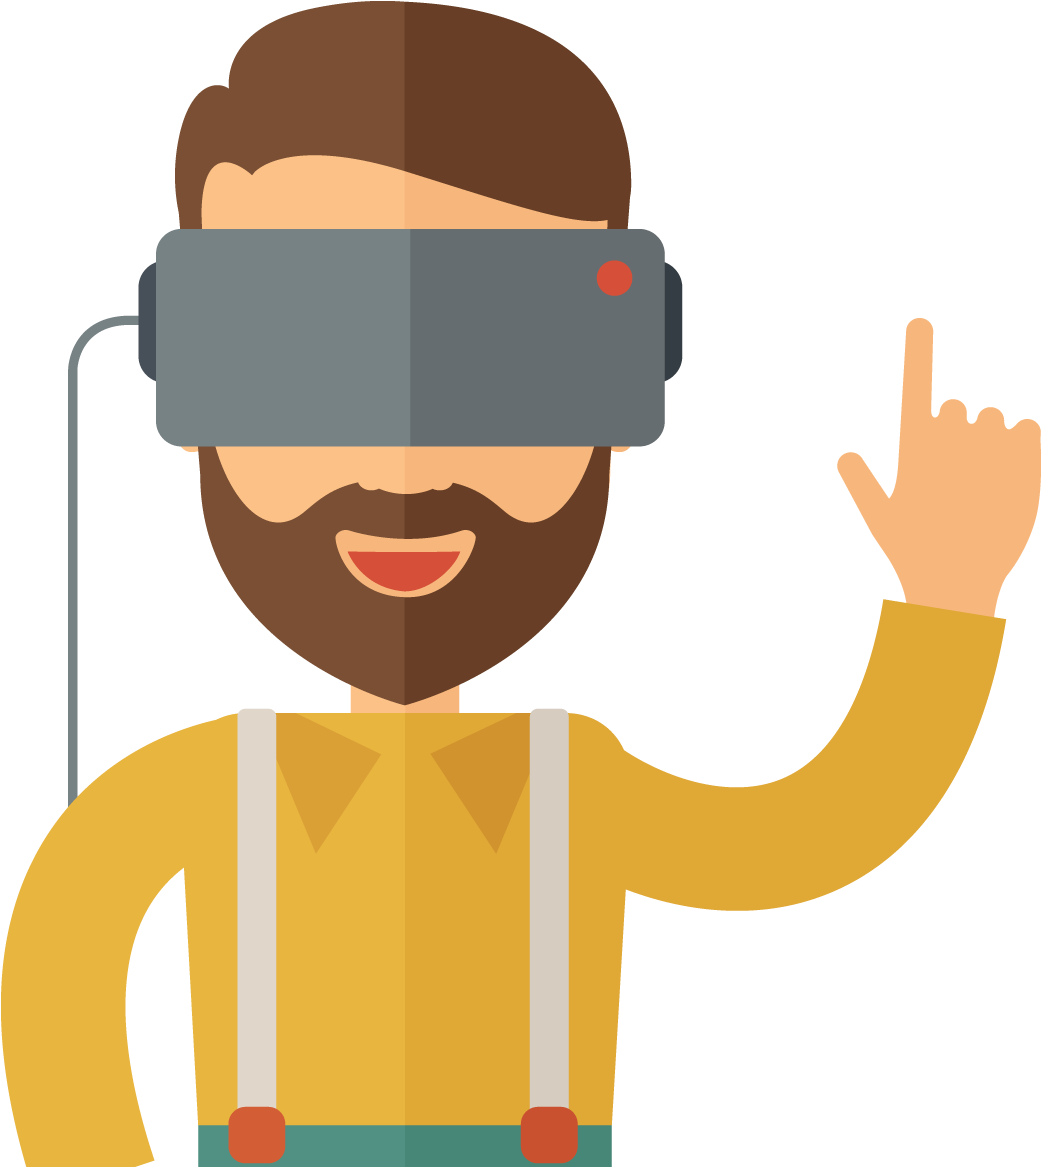 Free Virtual Property Tours For All Of Our Clients - Vr Based Learning (1275x1182)